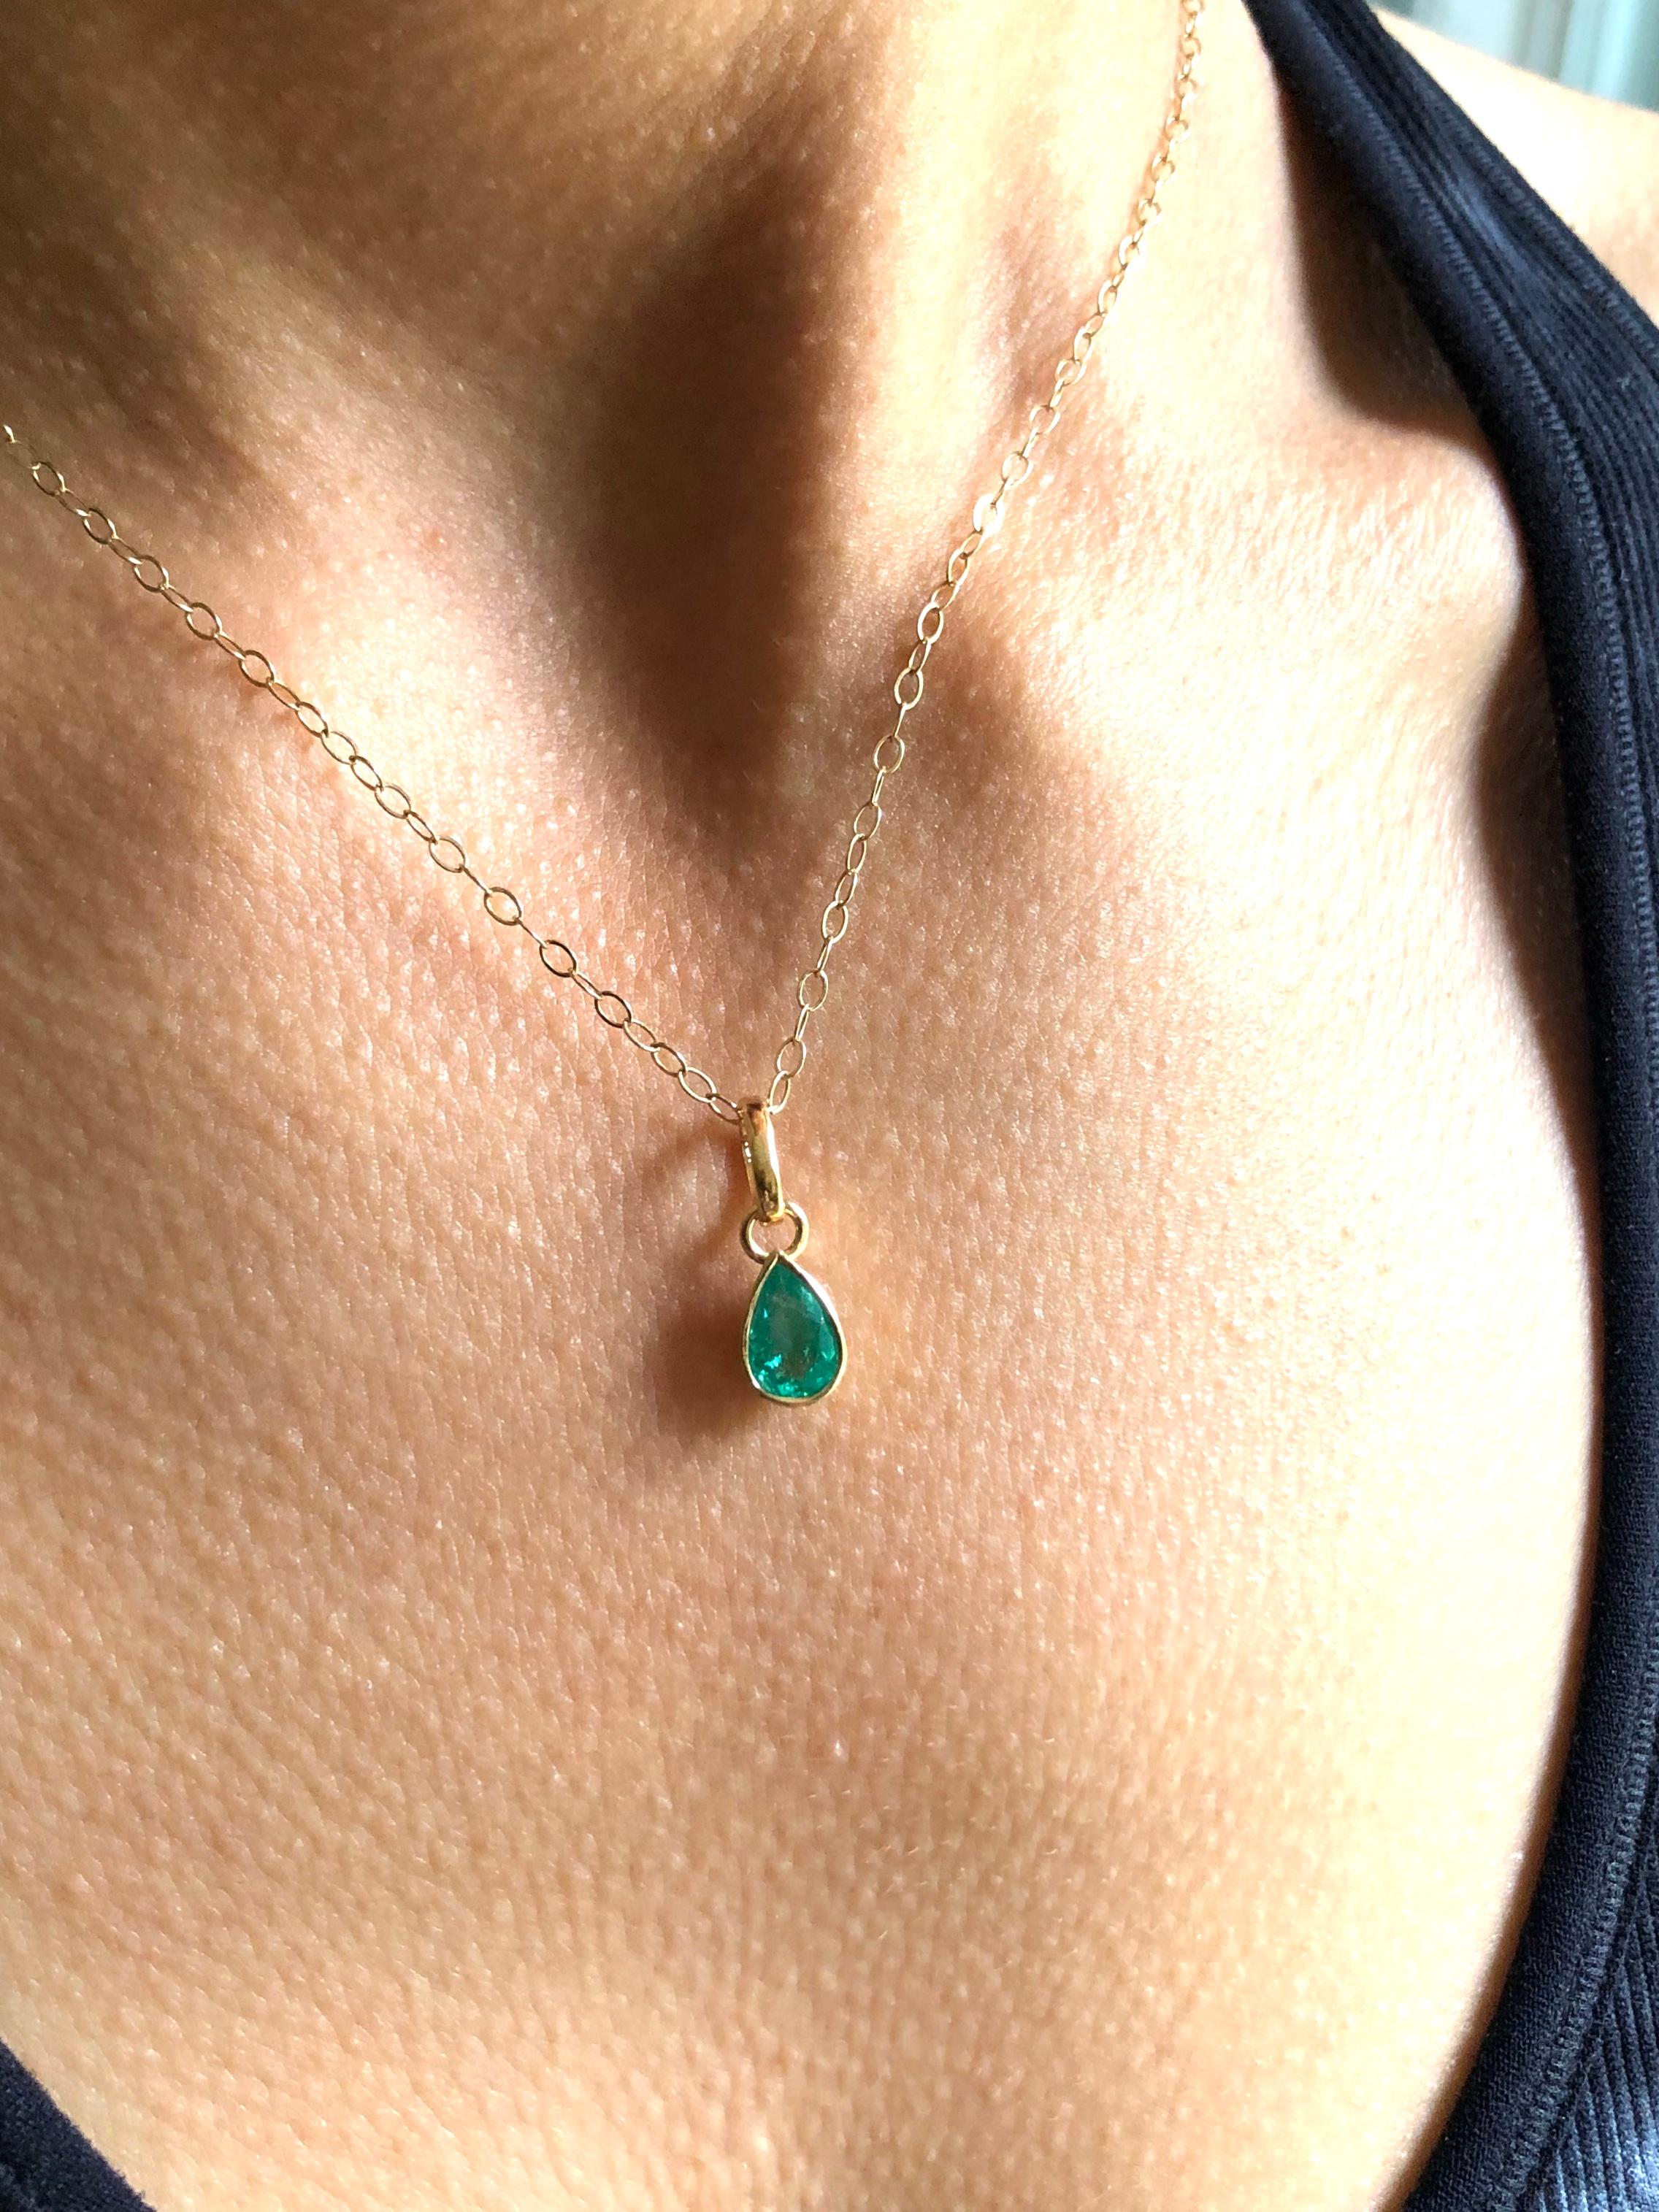 Shimmering emerald charm drop pendant bezel set Colombian emerald pear cut. All natural.
featuring one genuine and natural pear cut Colombian emerald, approx. 1.10 carat, glimmering perfect medium Intense green color, clarity VS. The pendant is made